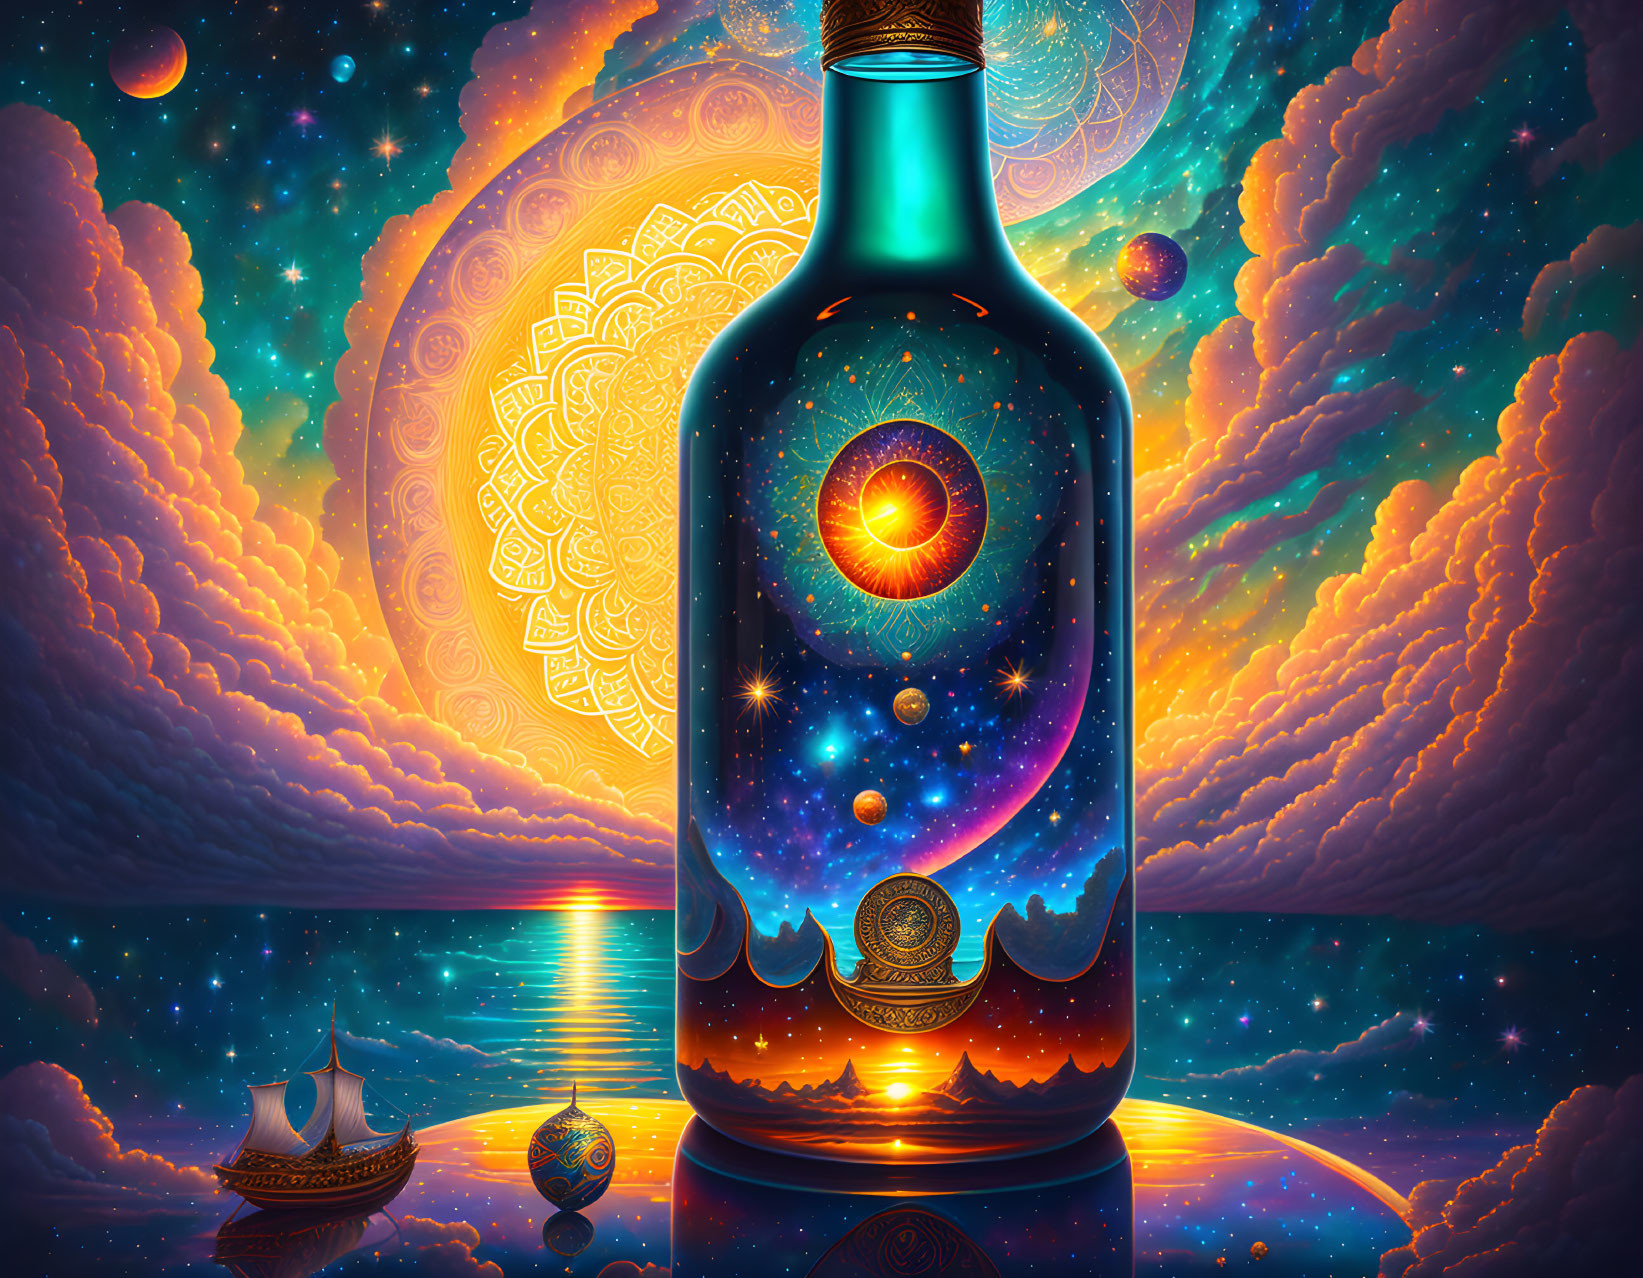 Surreal cosmic illustration of galaxy bottle with celestial bodies and mandala backdrop